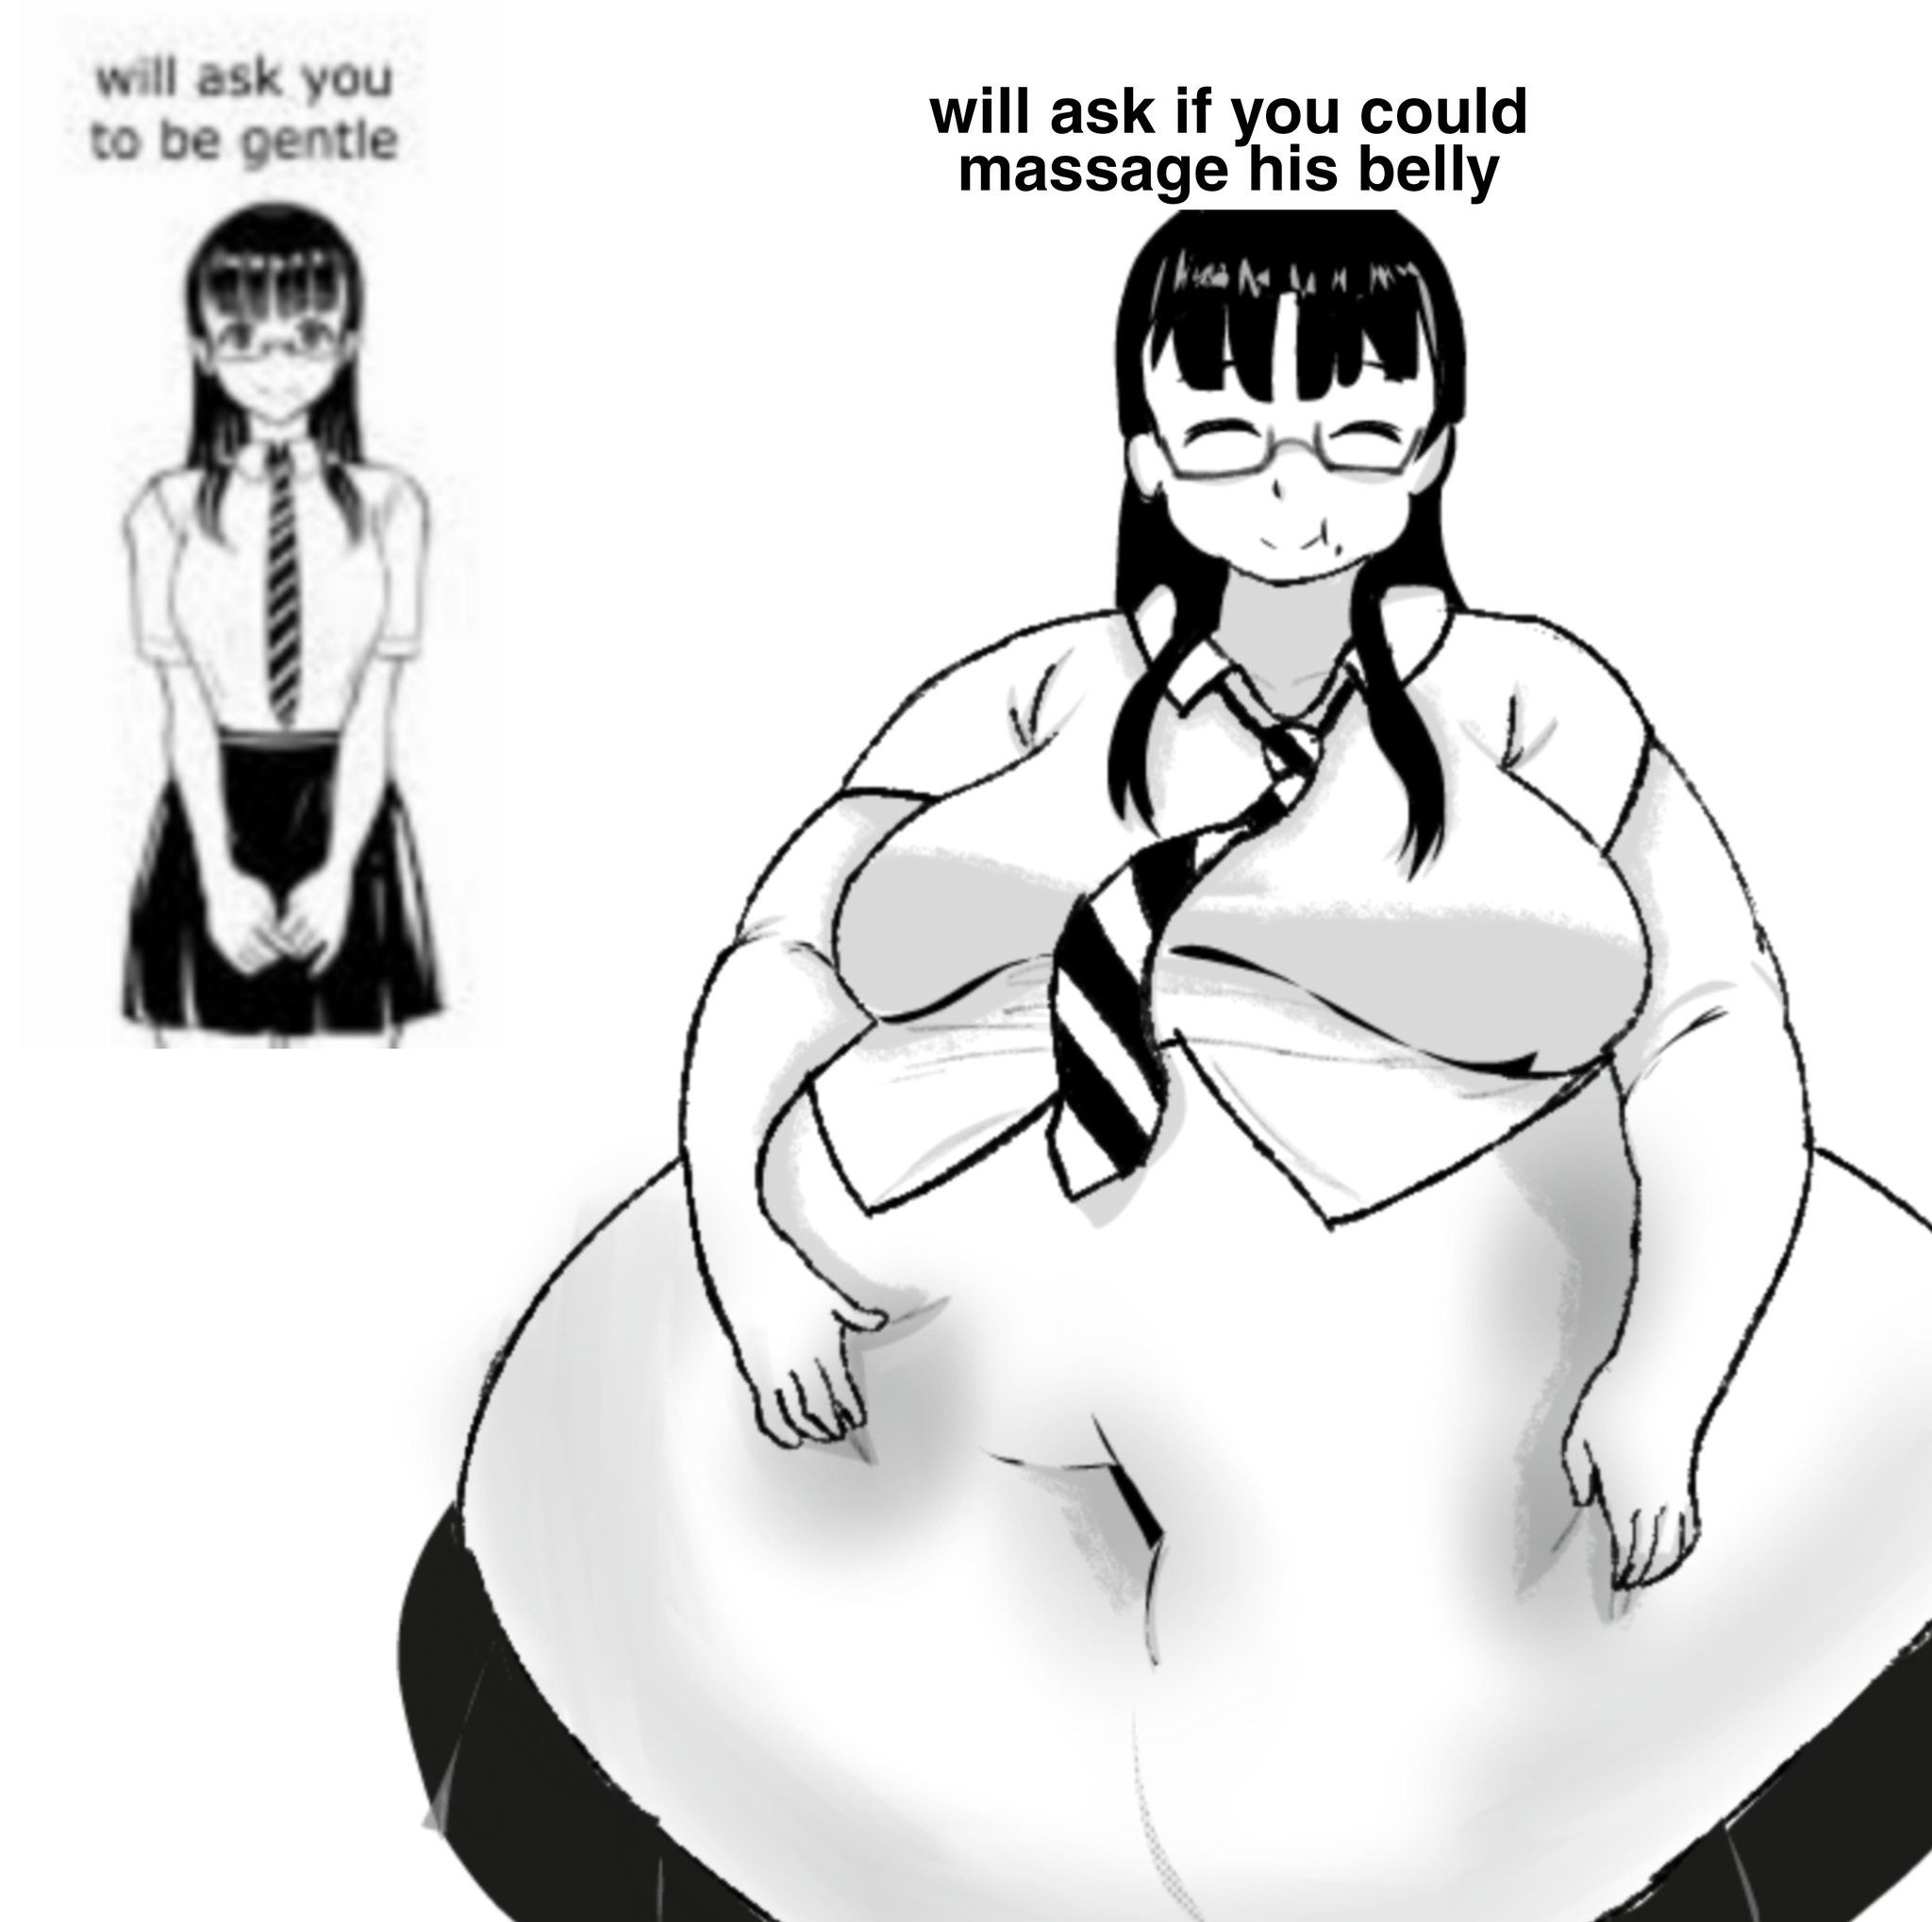 wants-to-be-dominated-but-fat-meme-3-3-by-losboisx5-on-deviantart